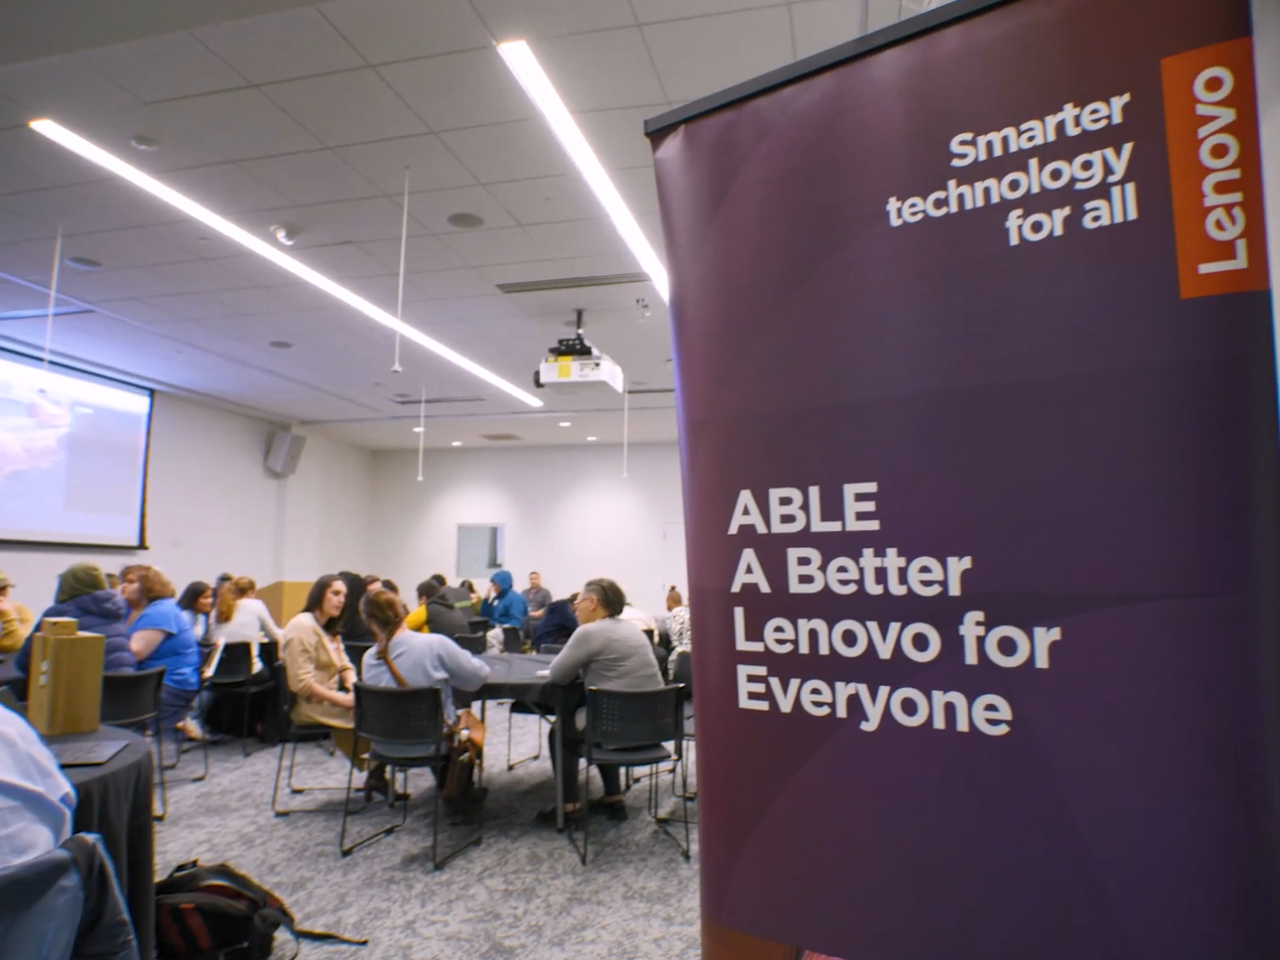 A banner "ABLE A better Lenovo for Everyone."